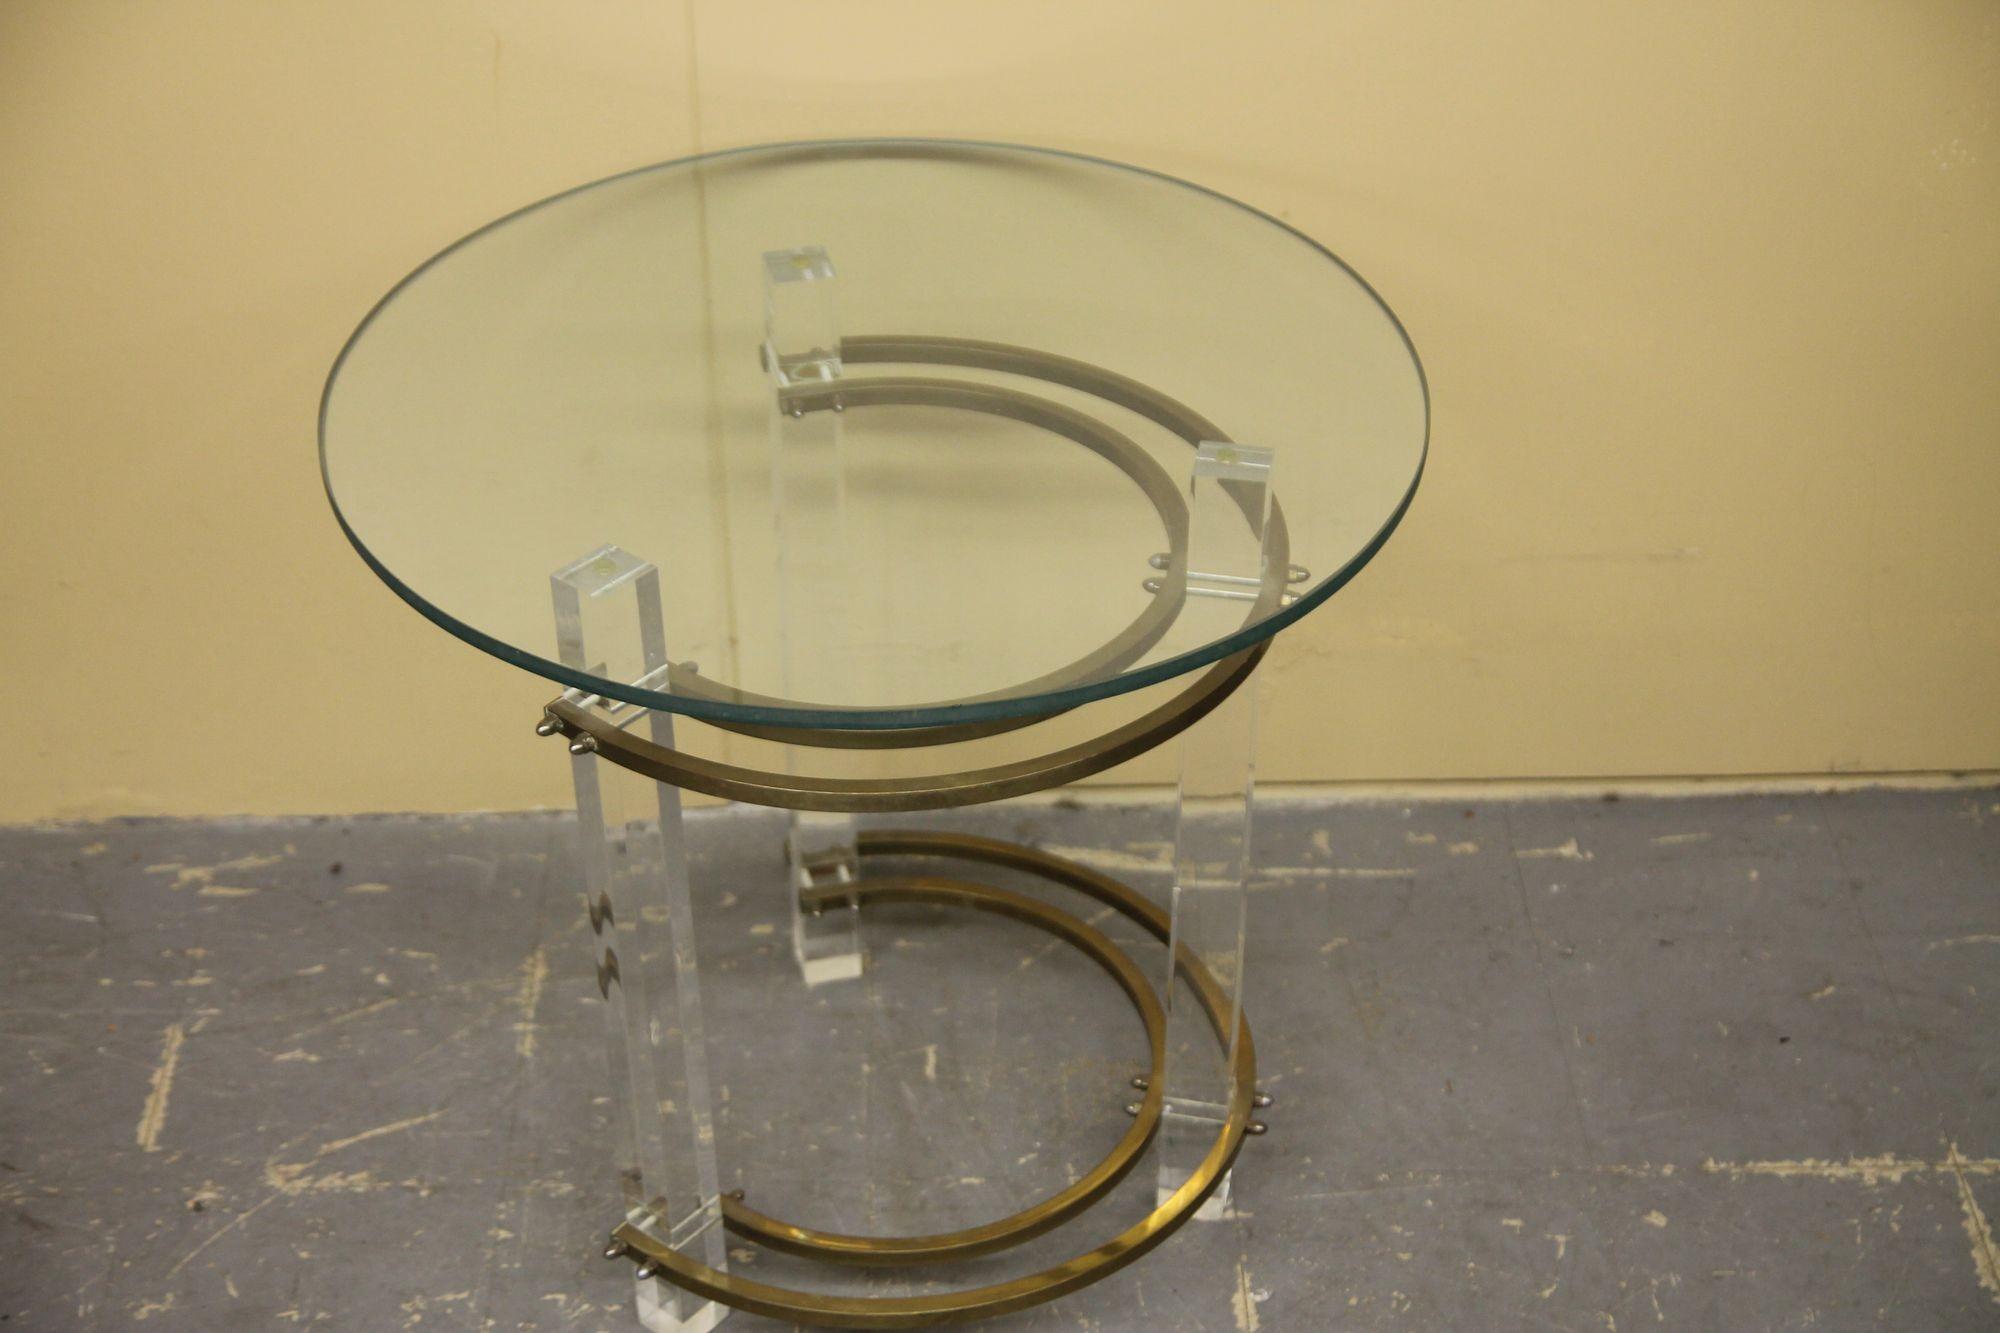 This nice vintage side table by Charles Hollis Jones is constructed with lucite legs, brass stretchers and glass top. In nice vintage condition. Will be posting the matching coffee table with oval top.